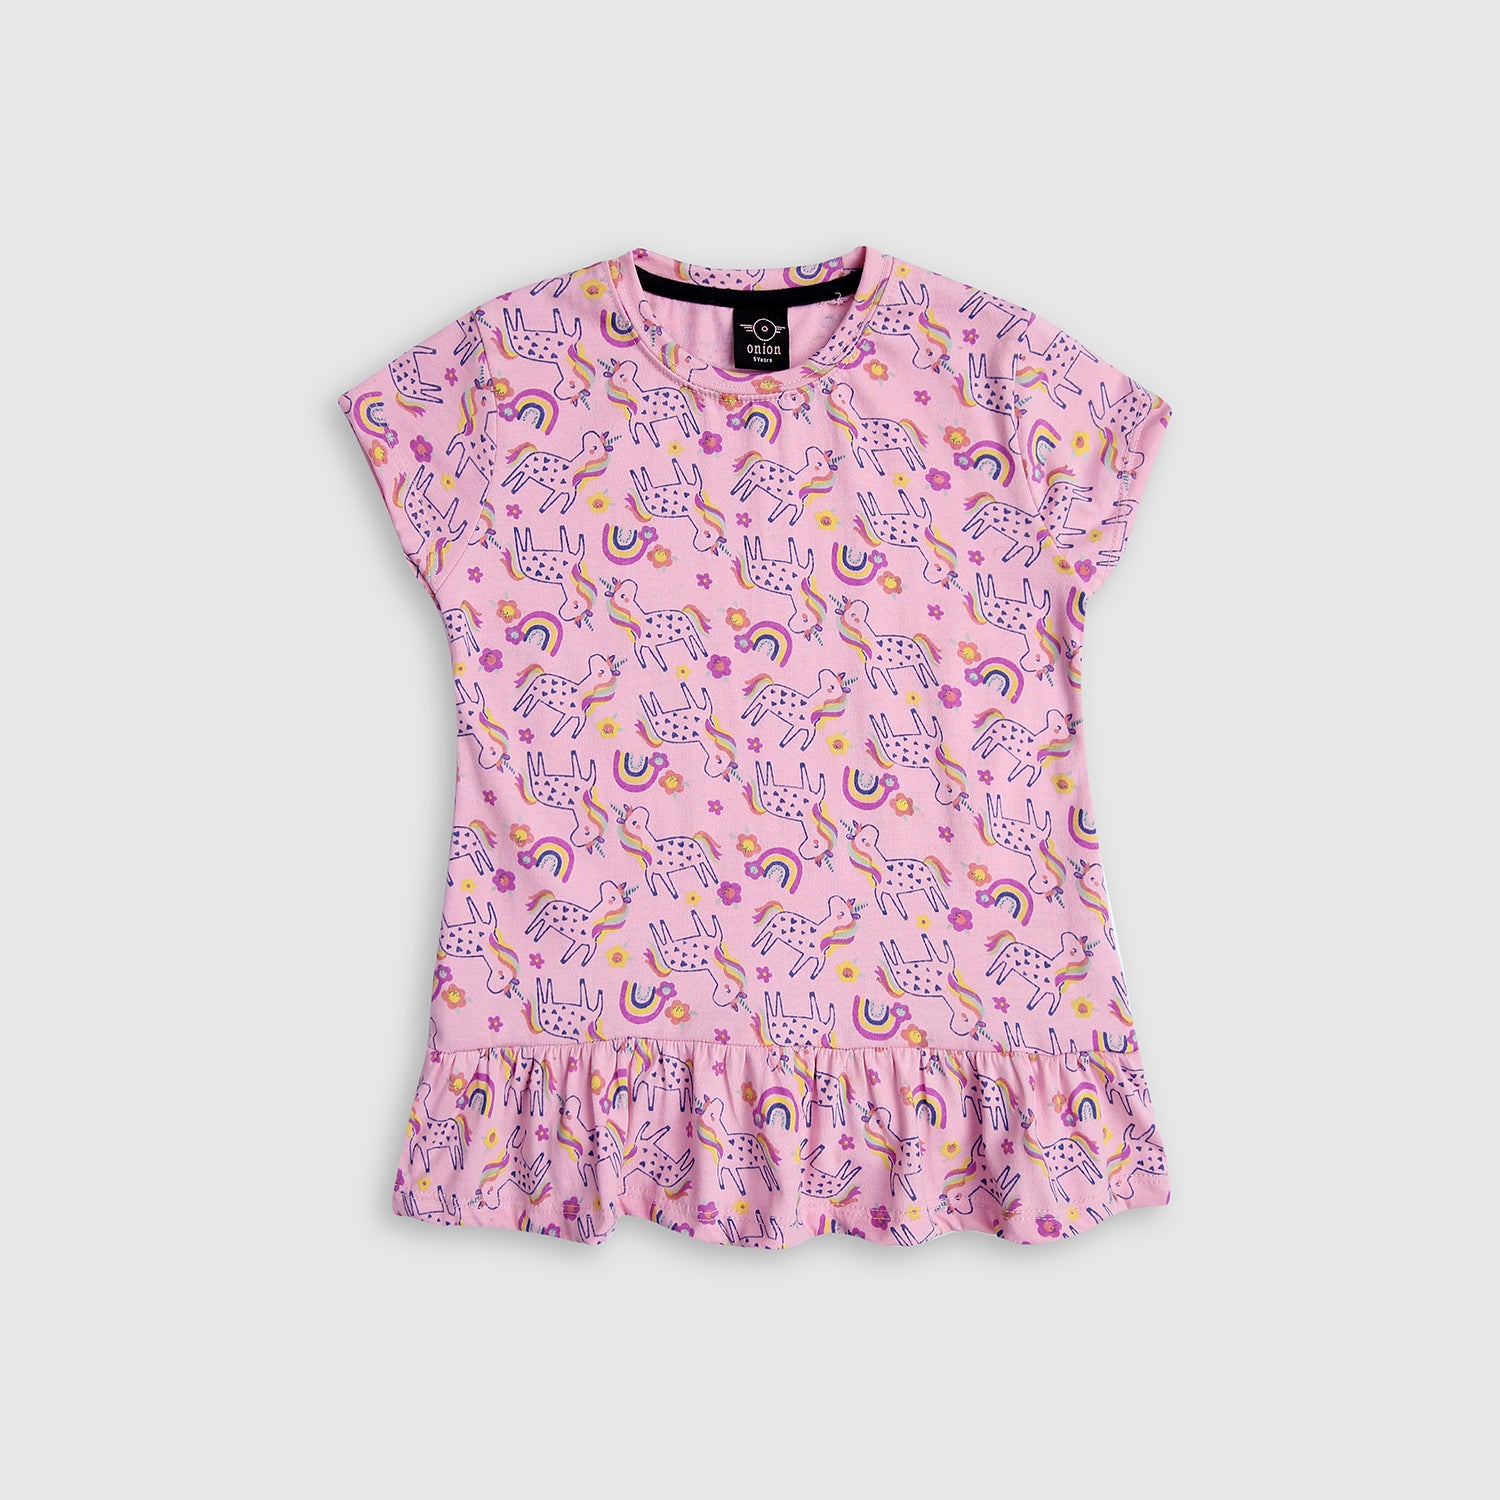 Girls Pure Cotton "Allover Printed" Pink T-shirt Frock